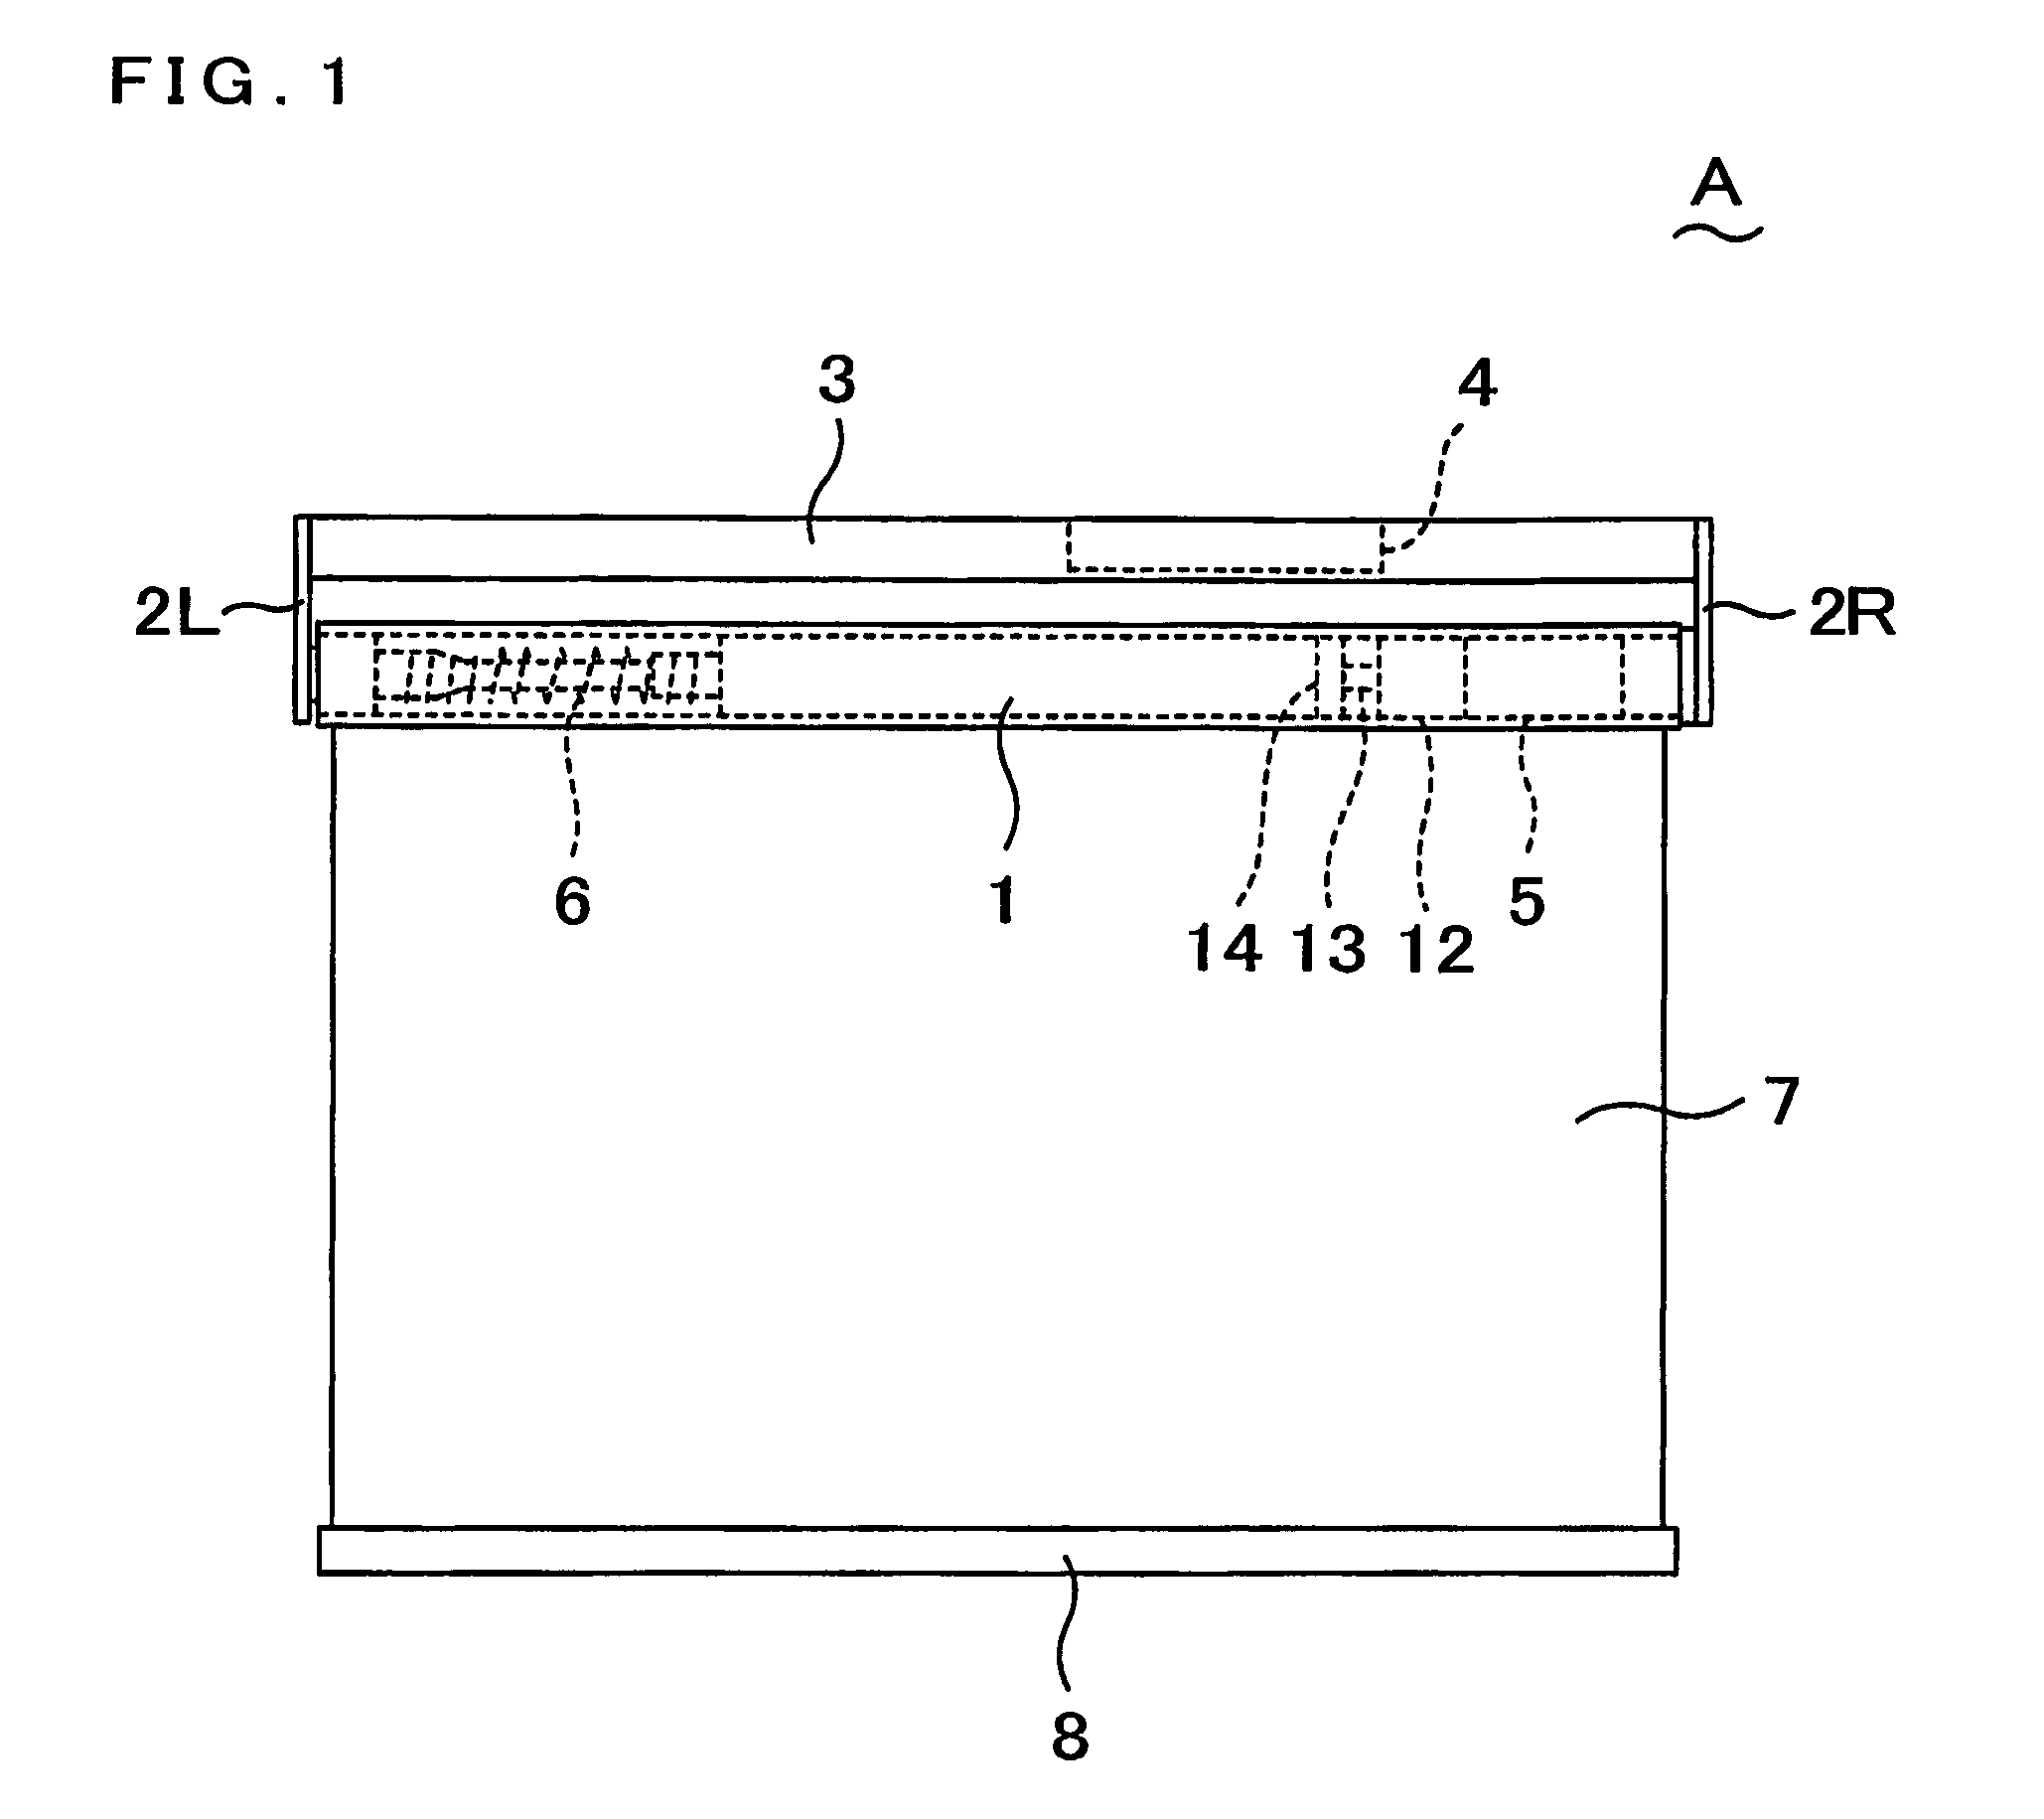 Remote-controlled light receiving structure of electric roll screen for blind